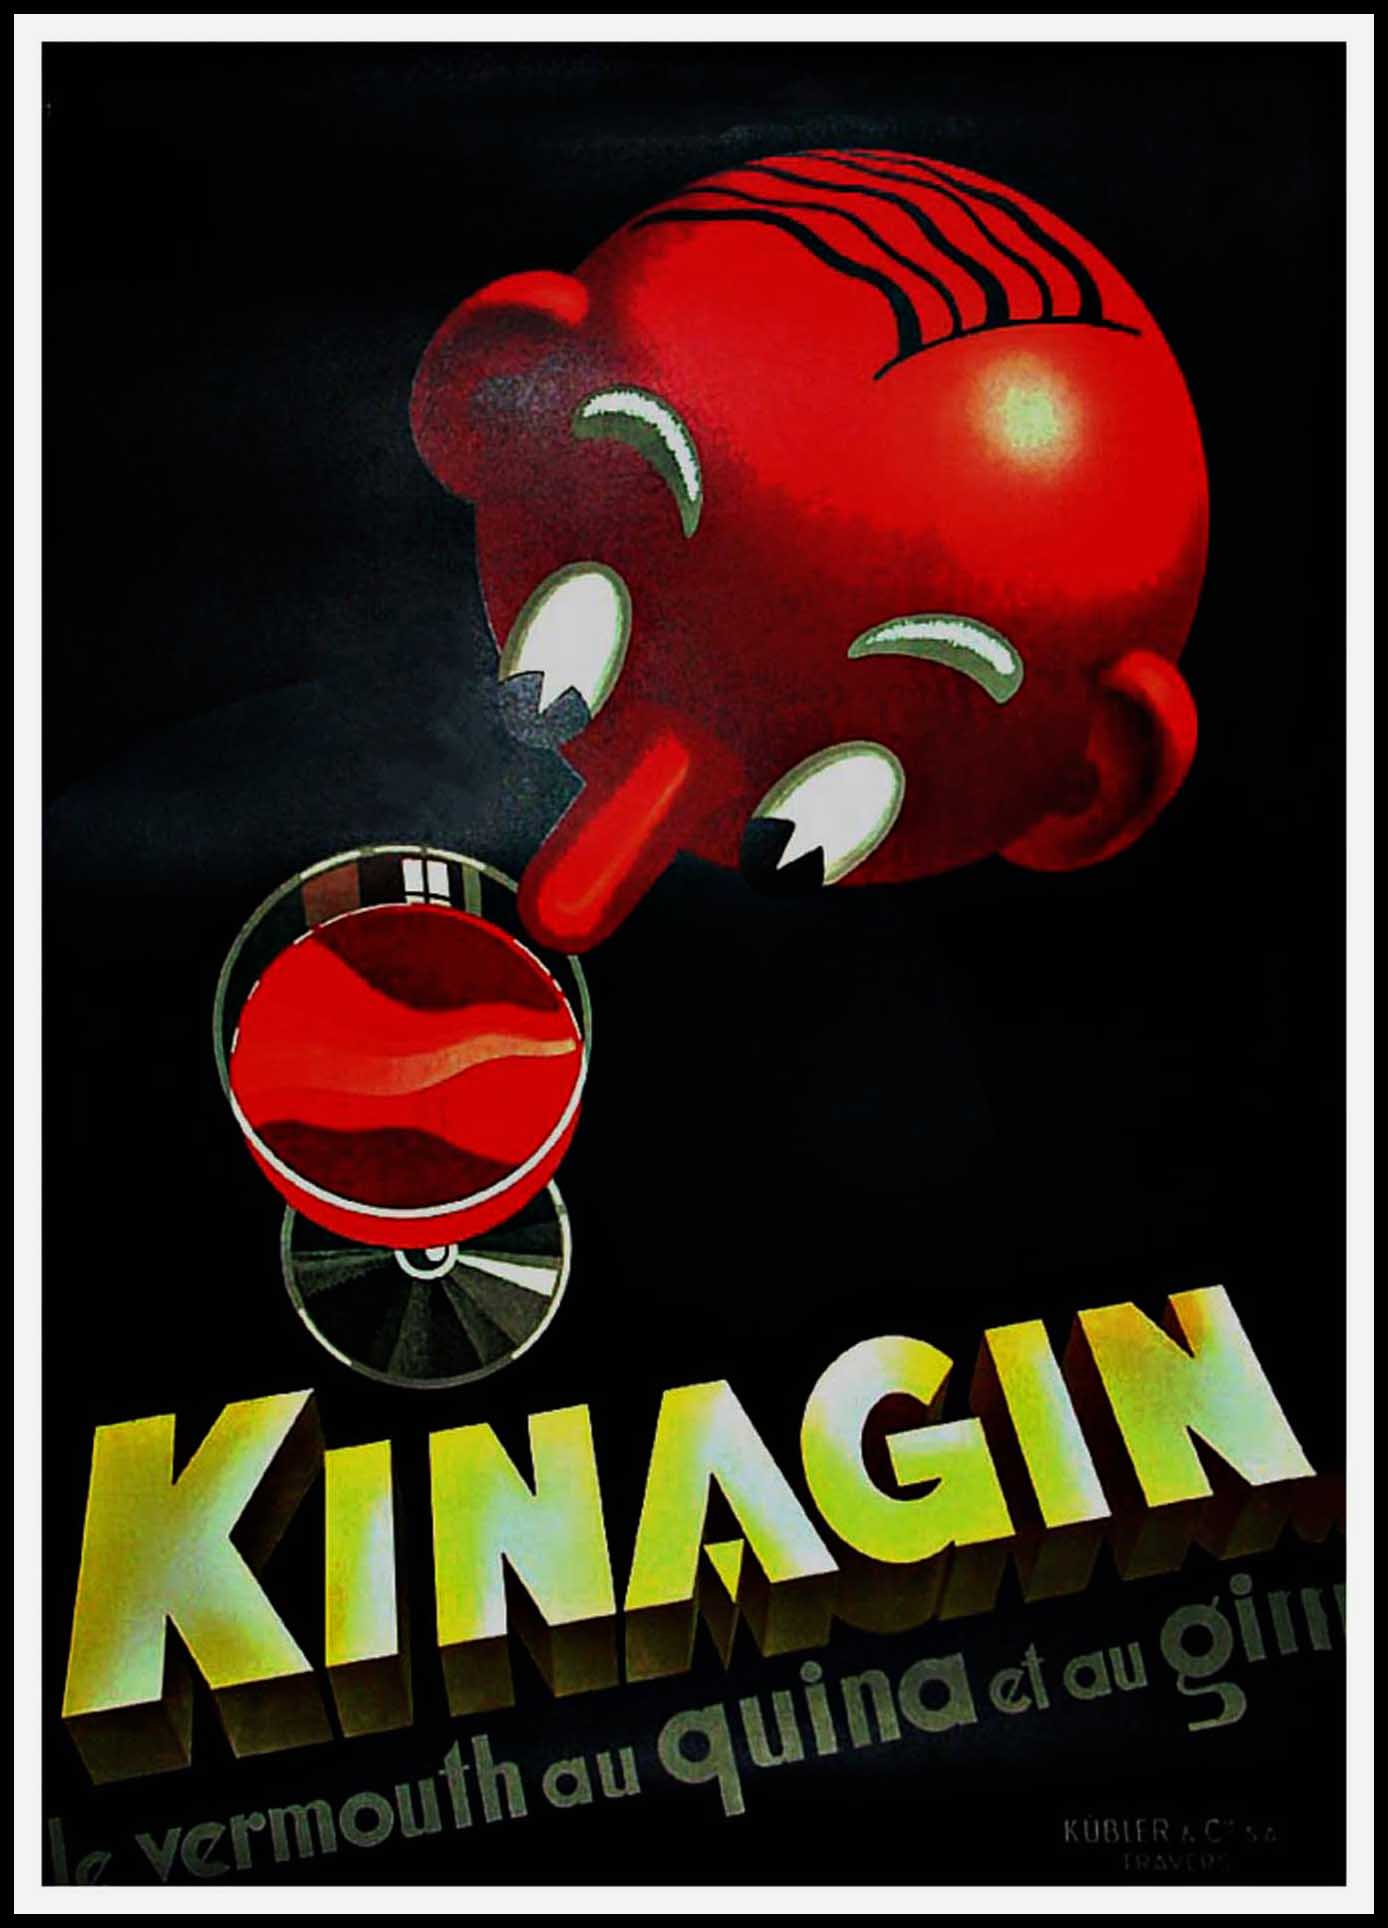 (alt="original vintage drink poster, KINAGIN, art deco, E. PATKEVITCH, signed in the plate printed by LAUSANNE")